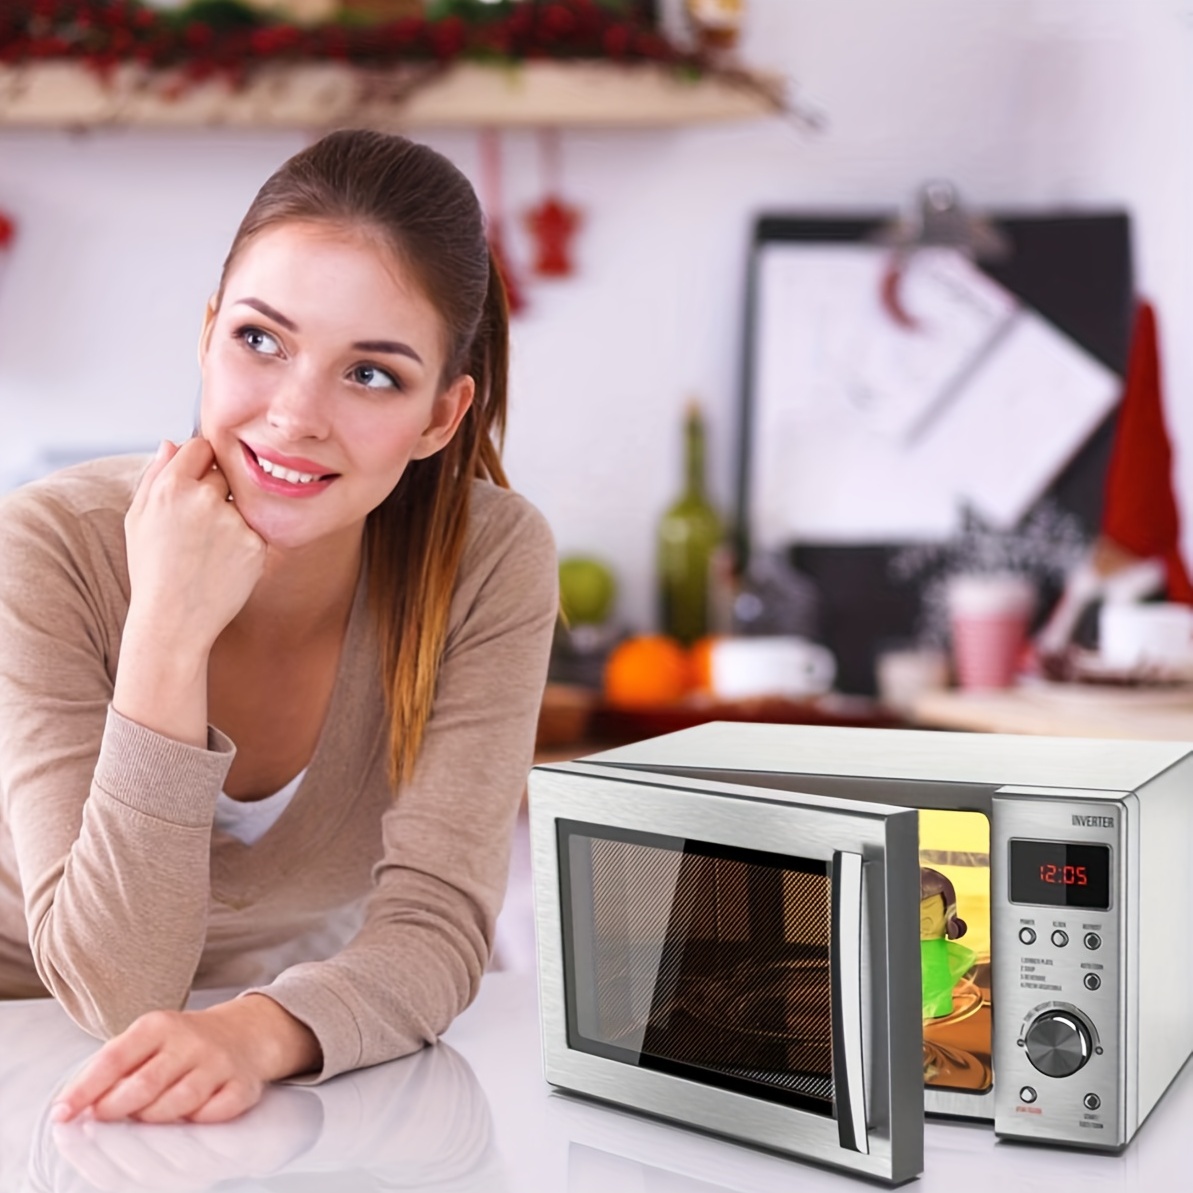 Oven Steam Cleaner Microwave Cleaner Easily Cleans Microwave Oven Steam  Cleaner Appliances for The Kitchen Refrigerator Cleaning